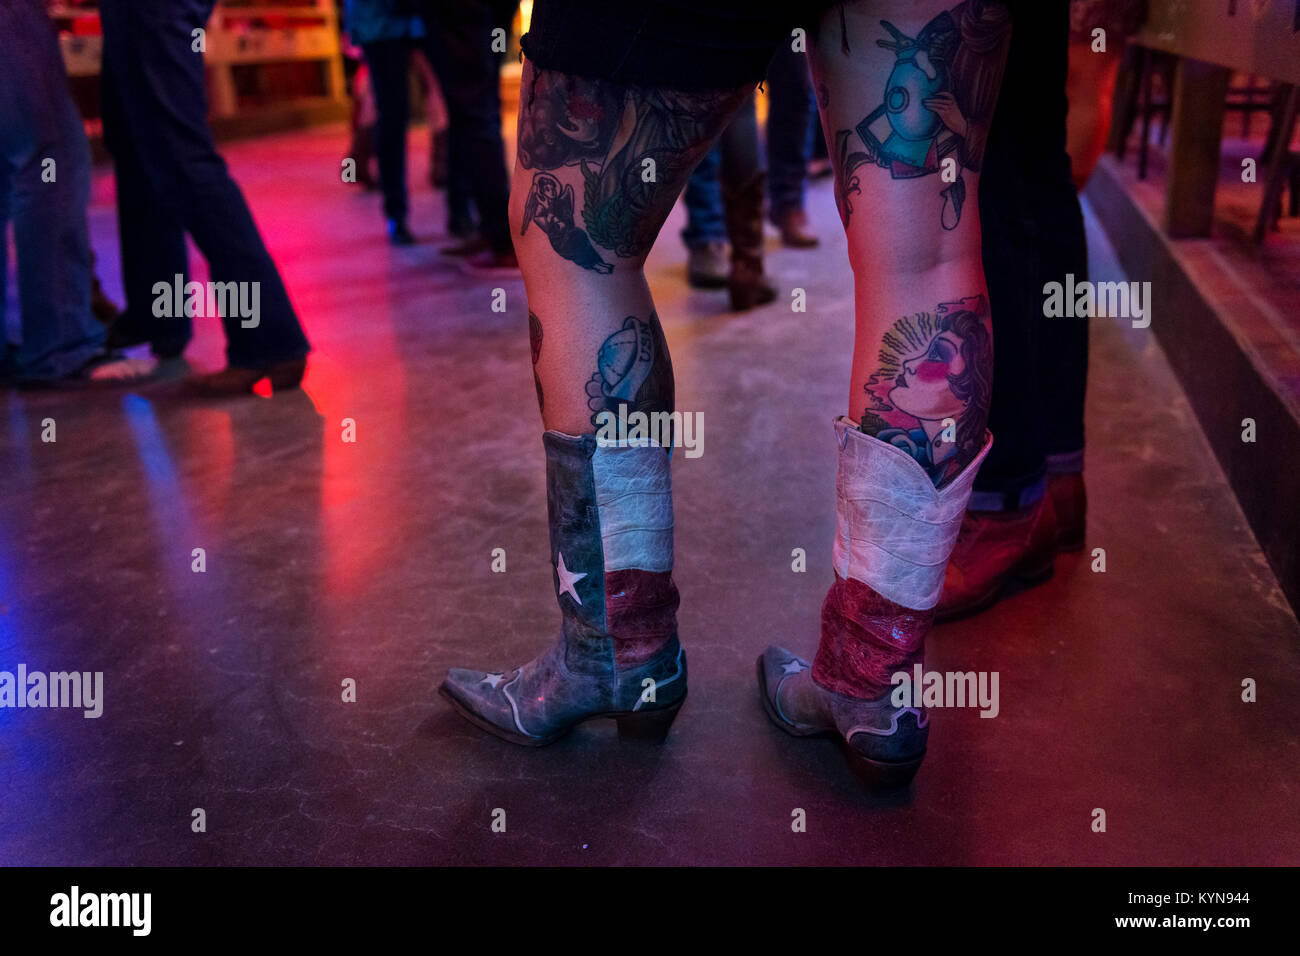 Austin, Texas - June 13, 2014: Detail of the boots and tattoed legs of a young woman in the Broken Spoke dance hall in Austin, Texas, USA Stock Photo